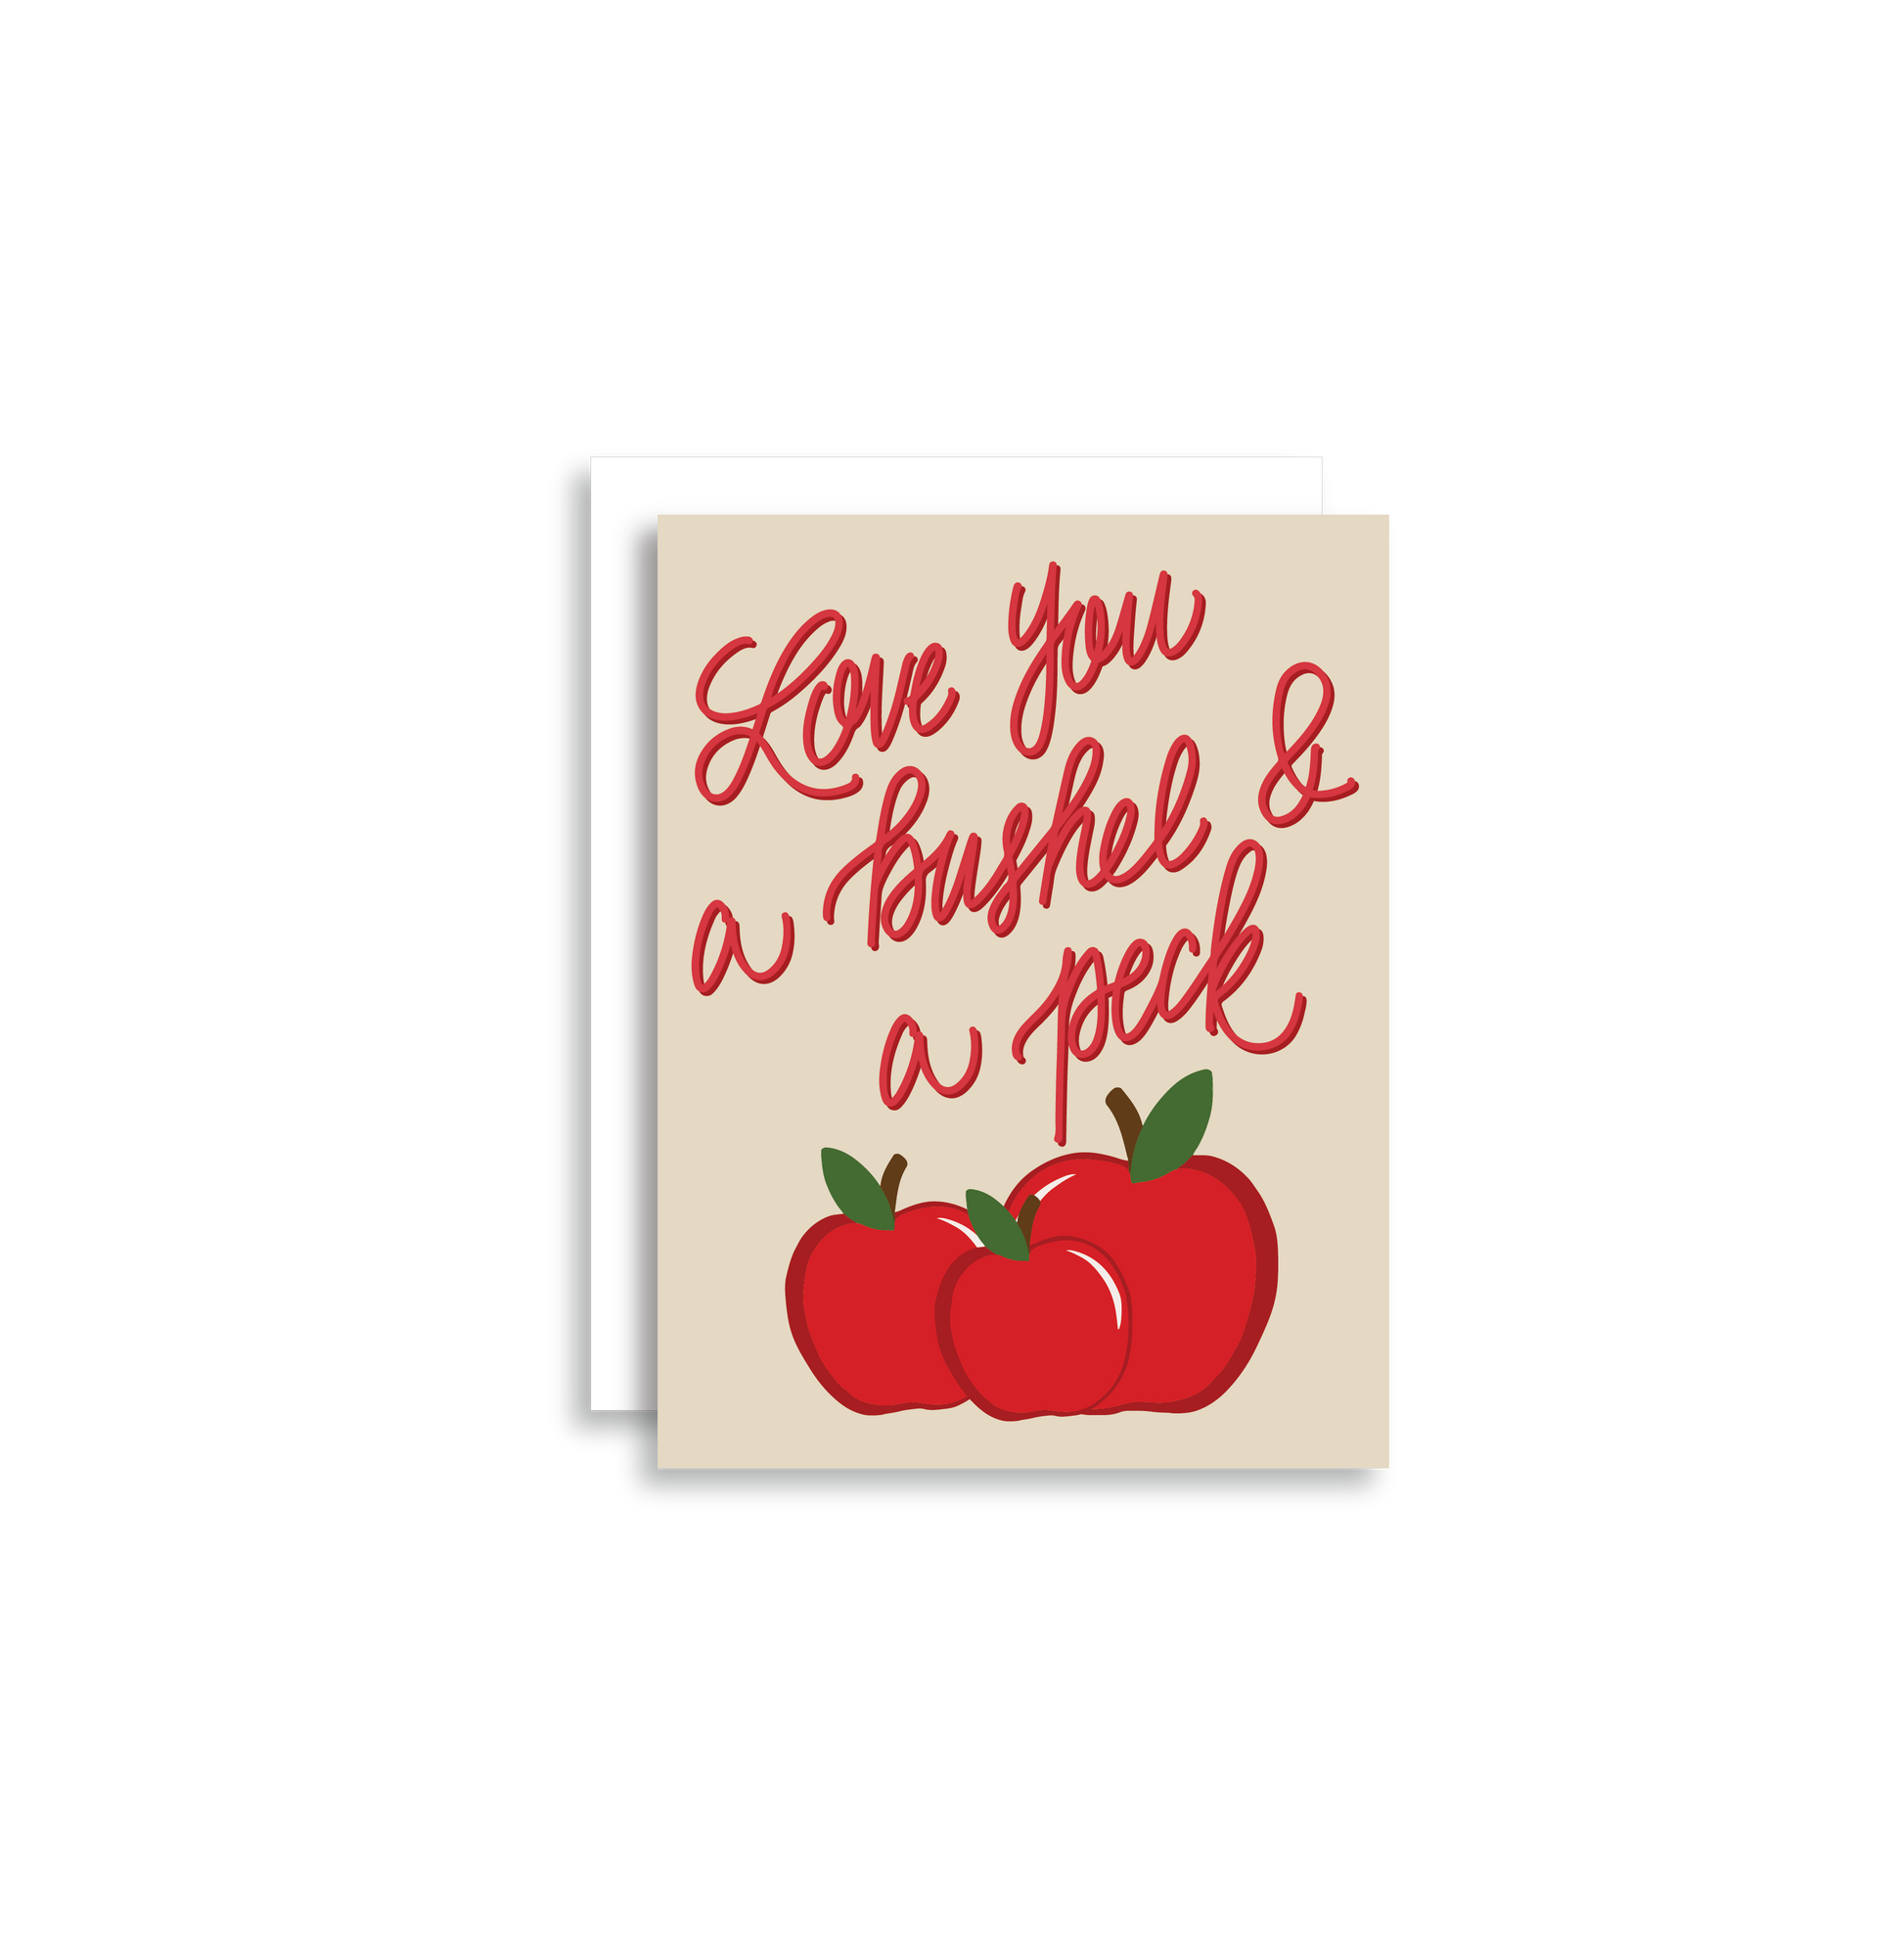 "Love You A Bushel and A Peck" greeting card is part of our cheerful fruit collection and so sweet for a little note of love or thanks to a special friend or child. Each card is folded to 4.25" tall by 5.5" wide, is blank inside and comes with a matching white envelope. Cards are packaged in cellophane sleeves. 